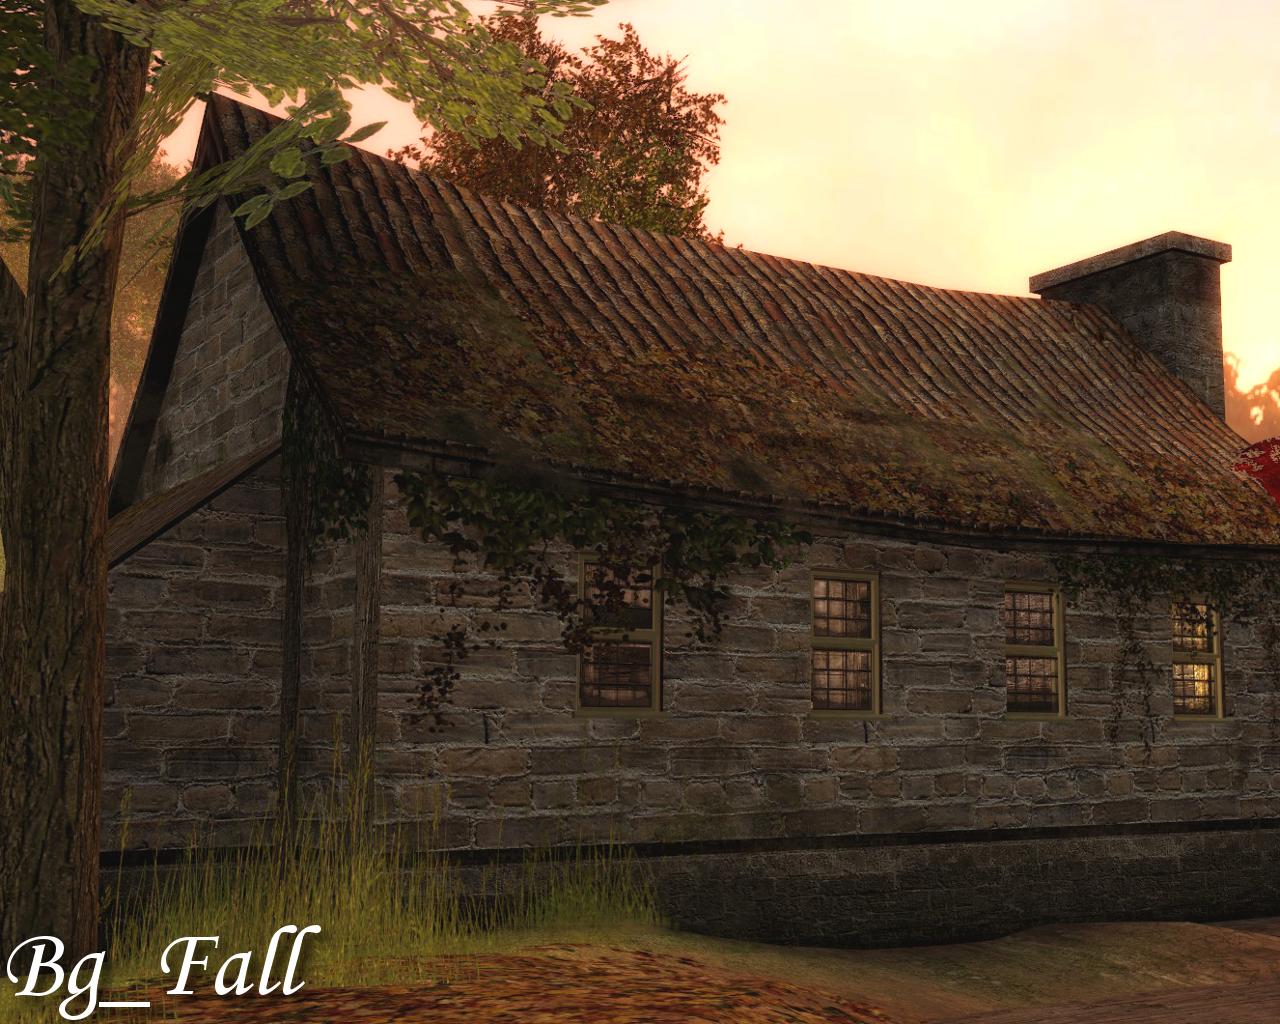 Small Farmhouse image - Player Homes mod for Fallout: New Vegas - Mod DB